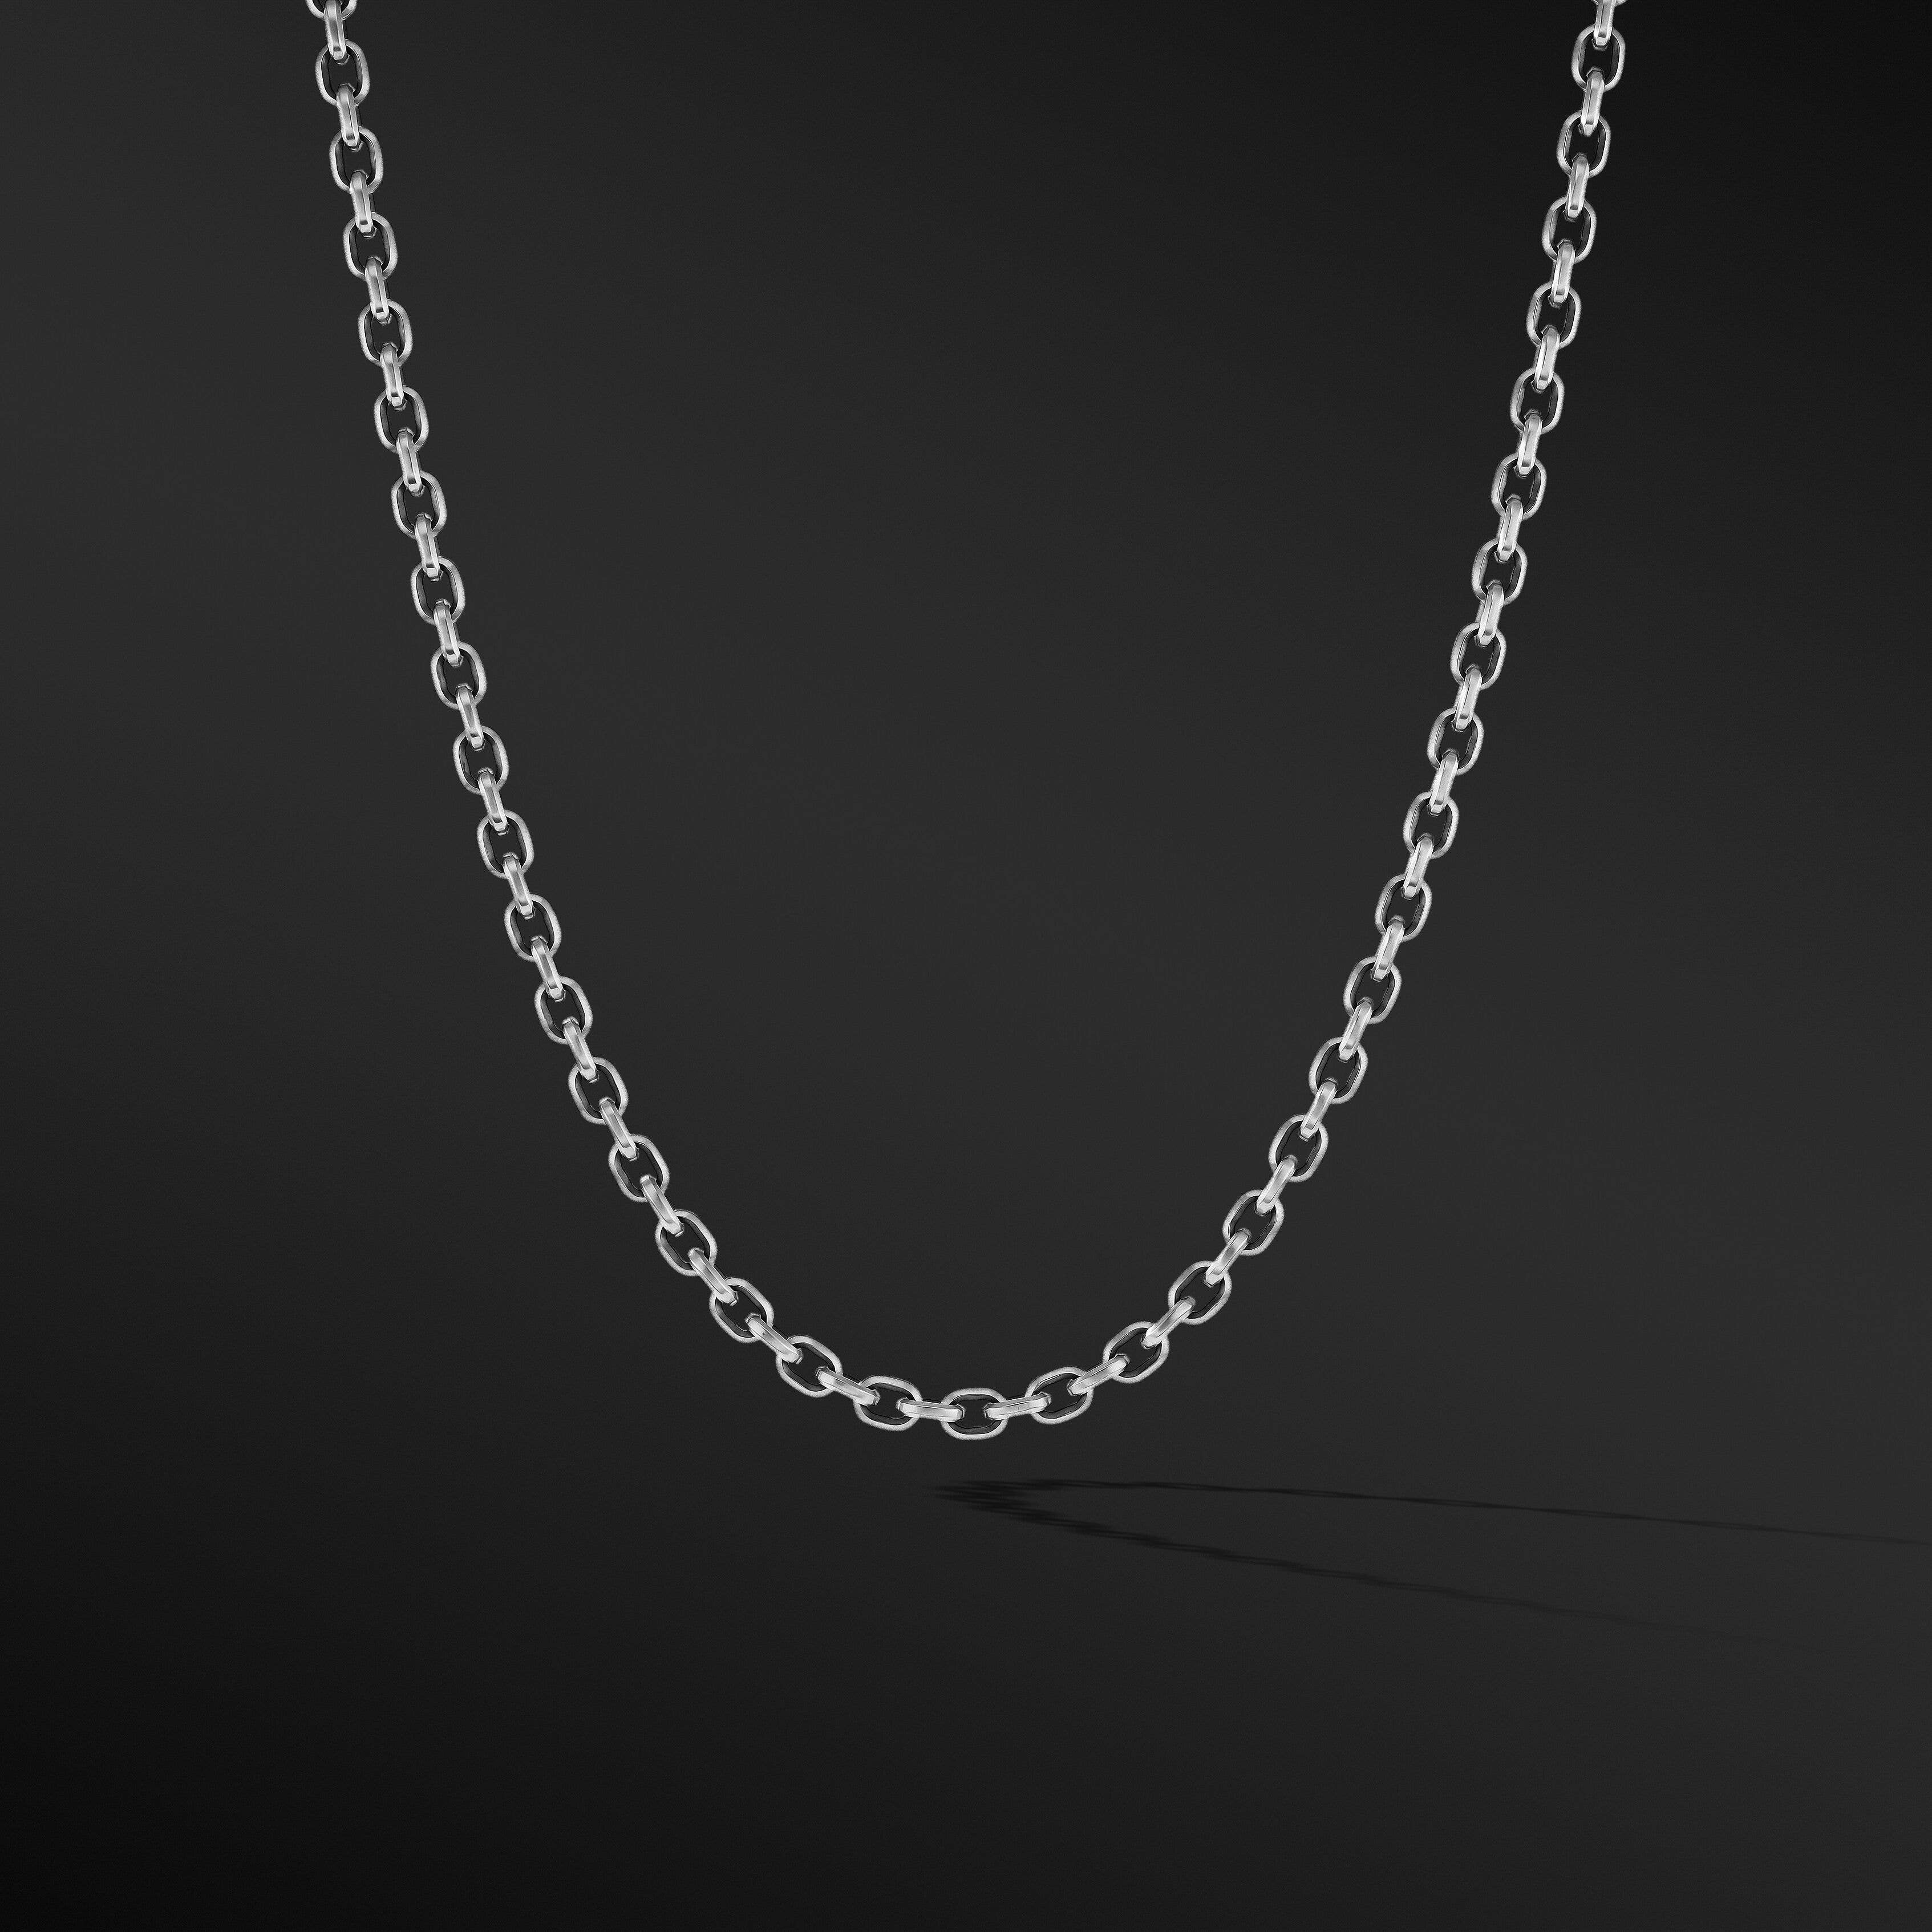 Deco Chain Link Necklace in Sterling Silver